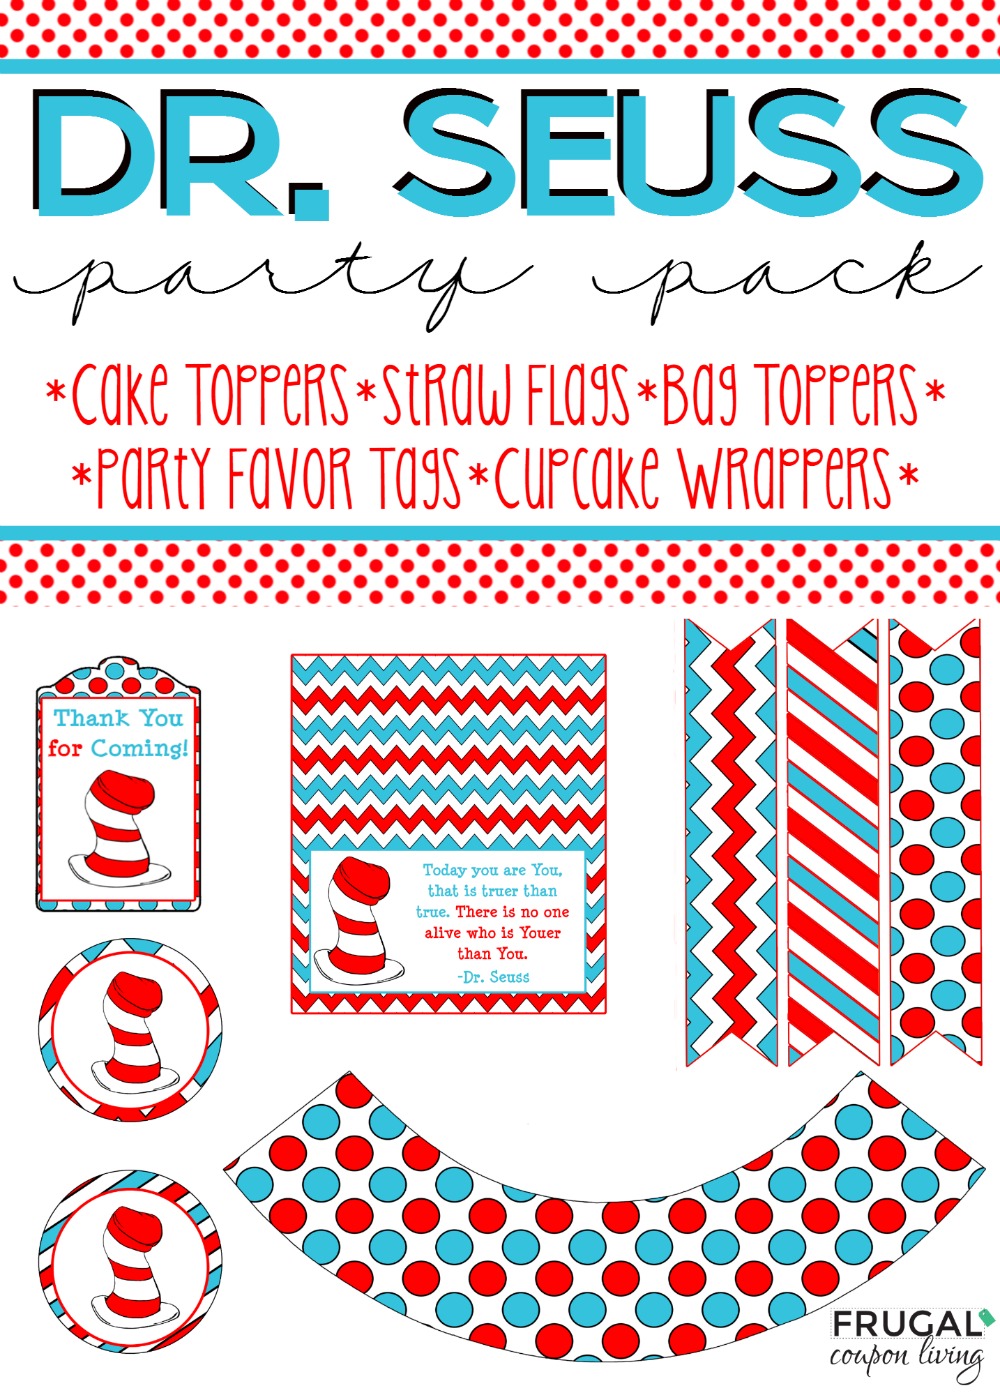 dr-seuss-party-pack-frugal-coupon-living-free